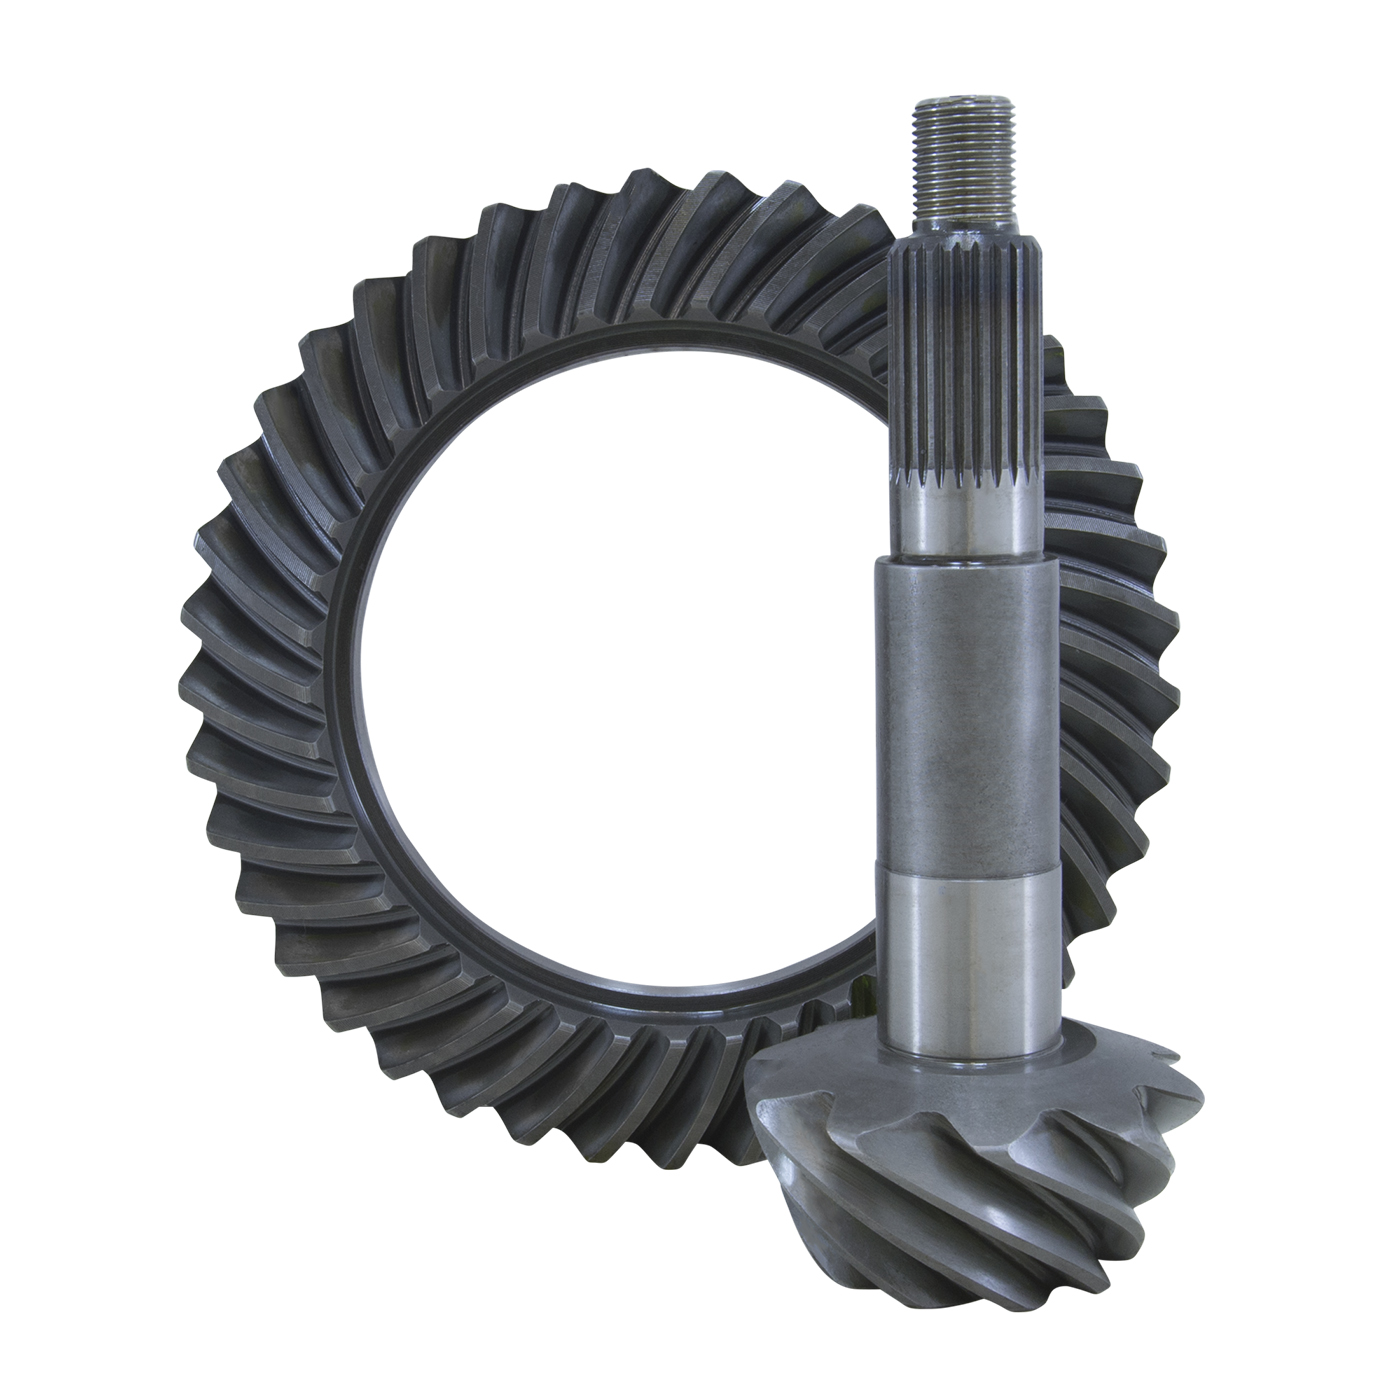 Replacement Ring & Pinion Gear Set for Dana 44 Differential USA Standard Gear ZG D44-411T 